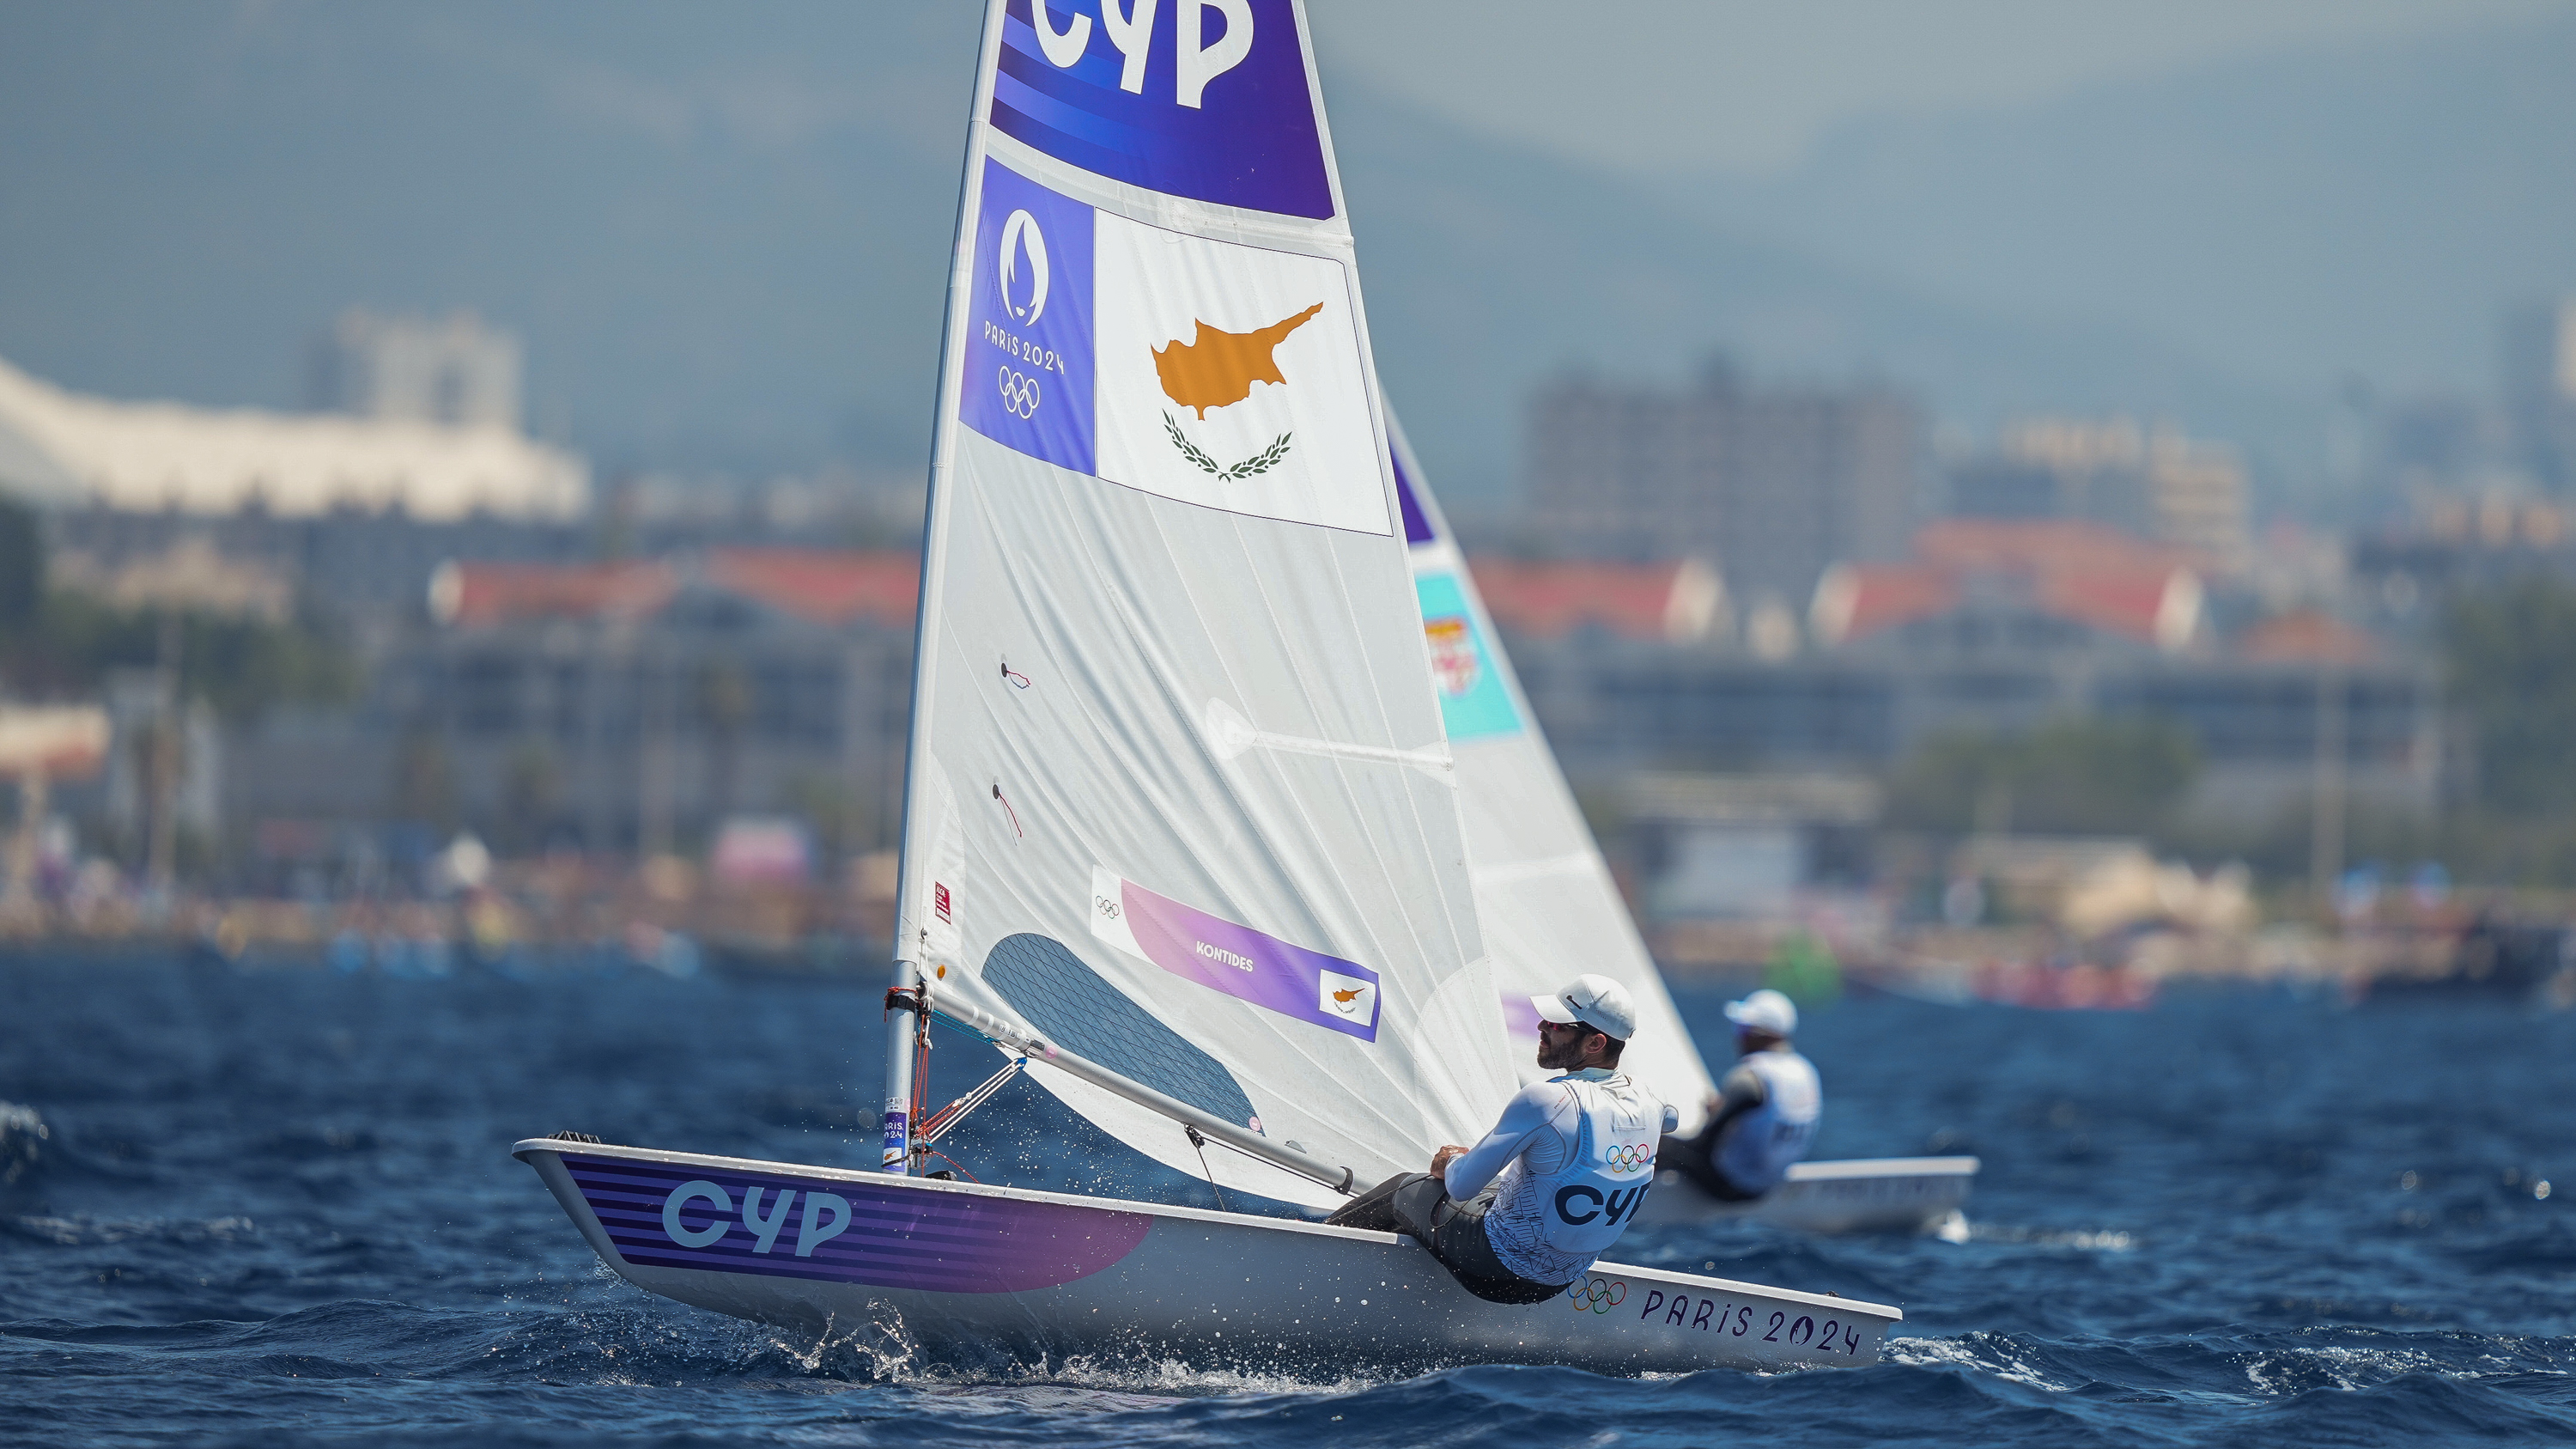 Kontides climbs to third in Olympic sailing